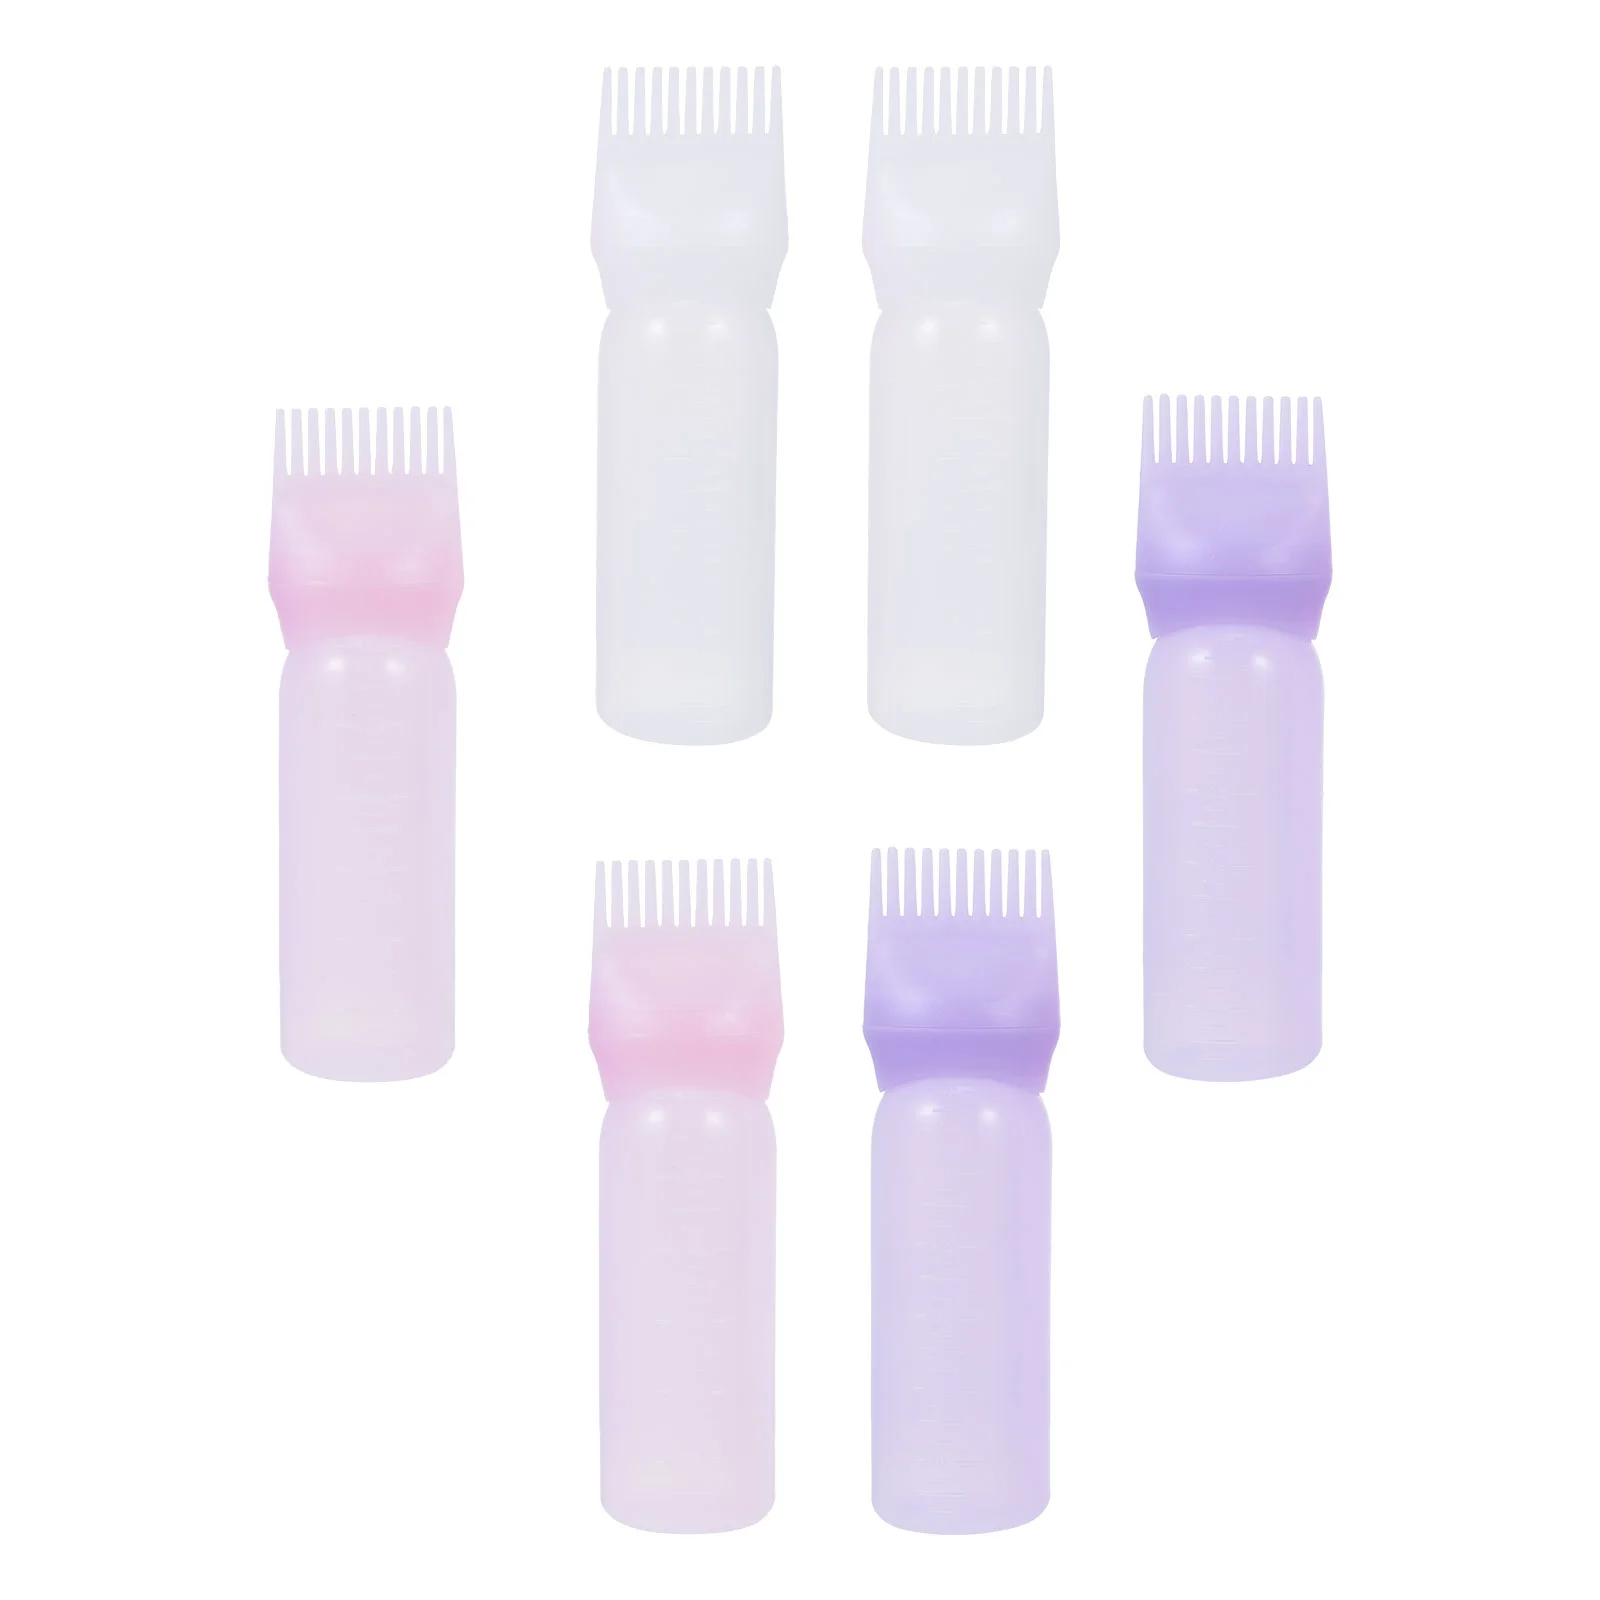 

Bottle Hair Applicator Comb Dye Bottles Coloring Color Root Portable Tool Dyeing Colors 3 Shampoo Brush Barbershop Oiling Salon